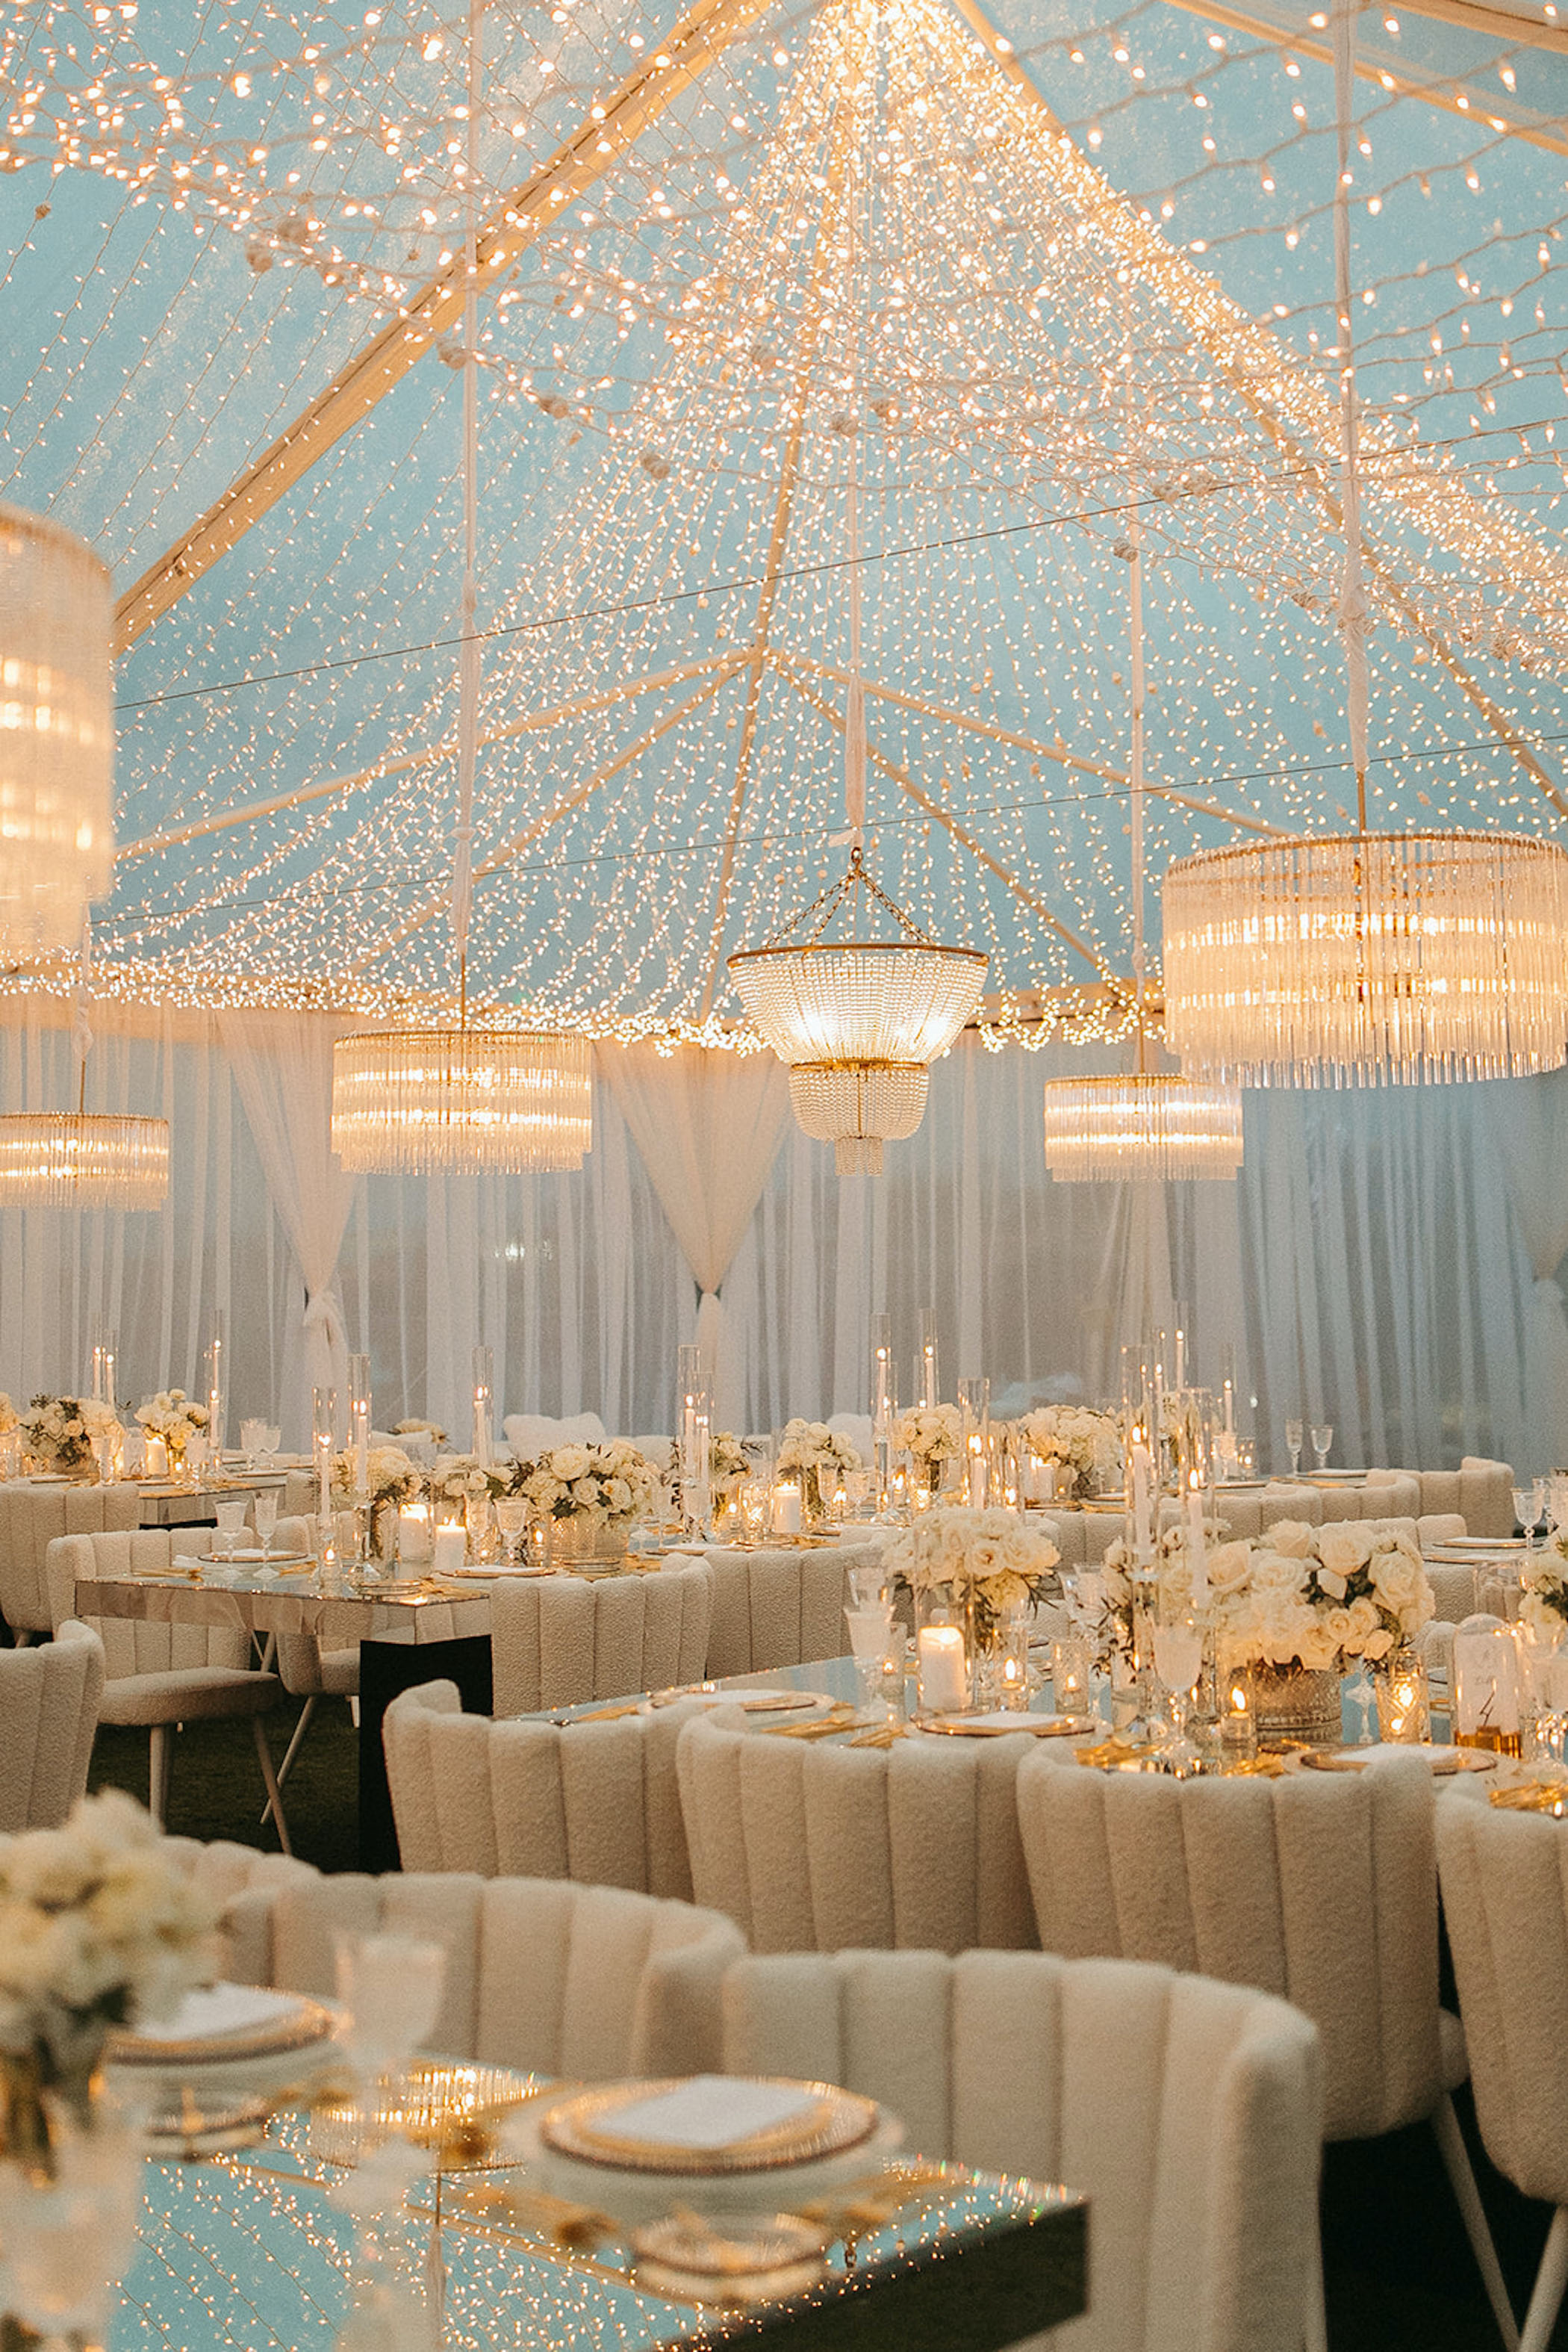 Modern Day Fairytale Wedding With Thousands of Sparkling Lights